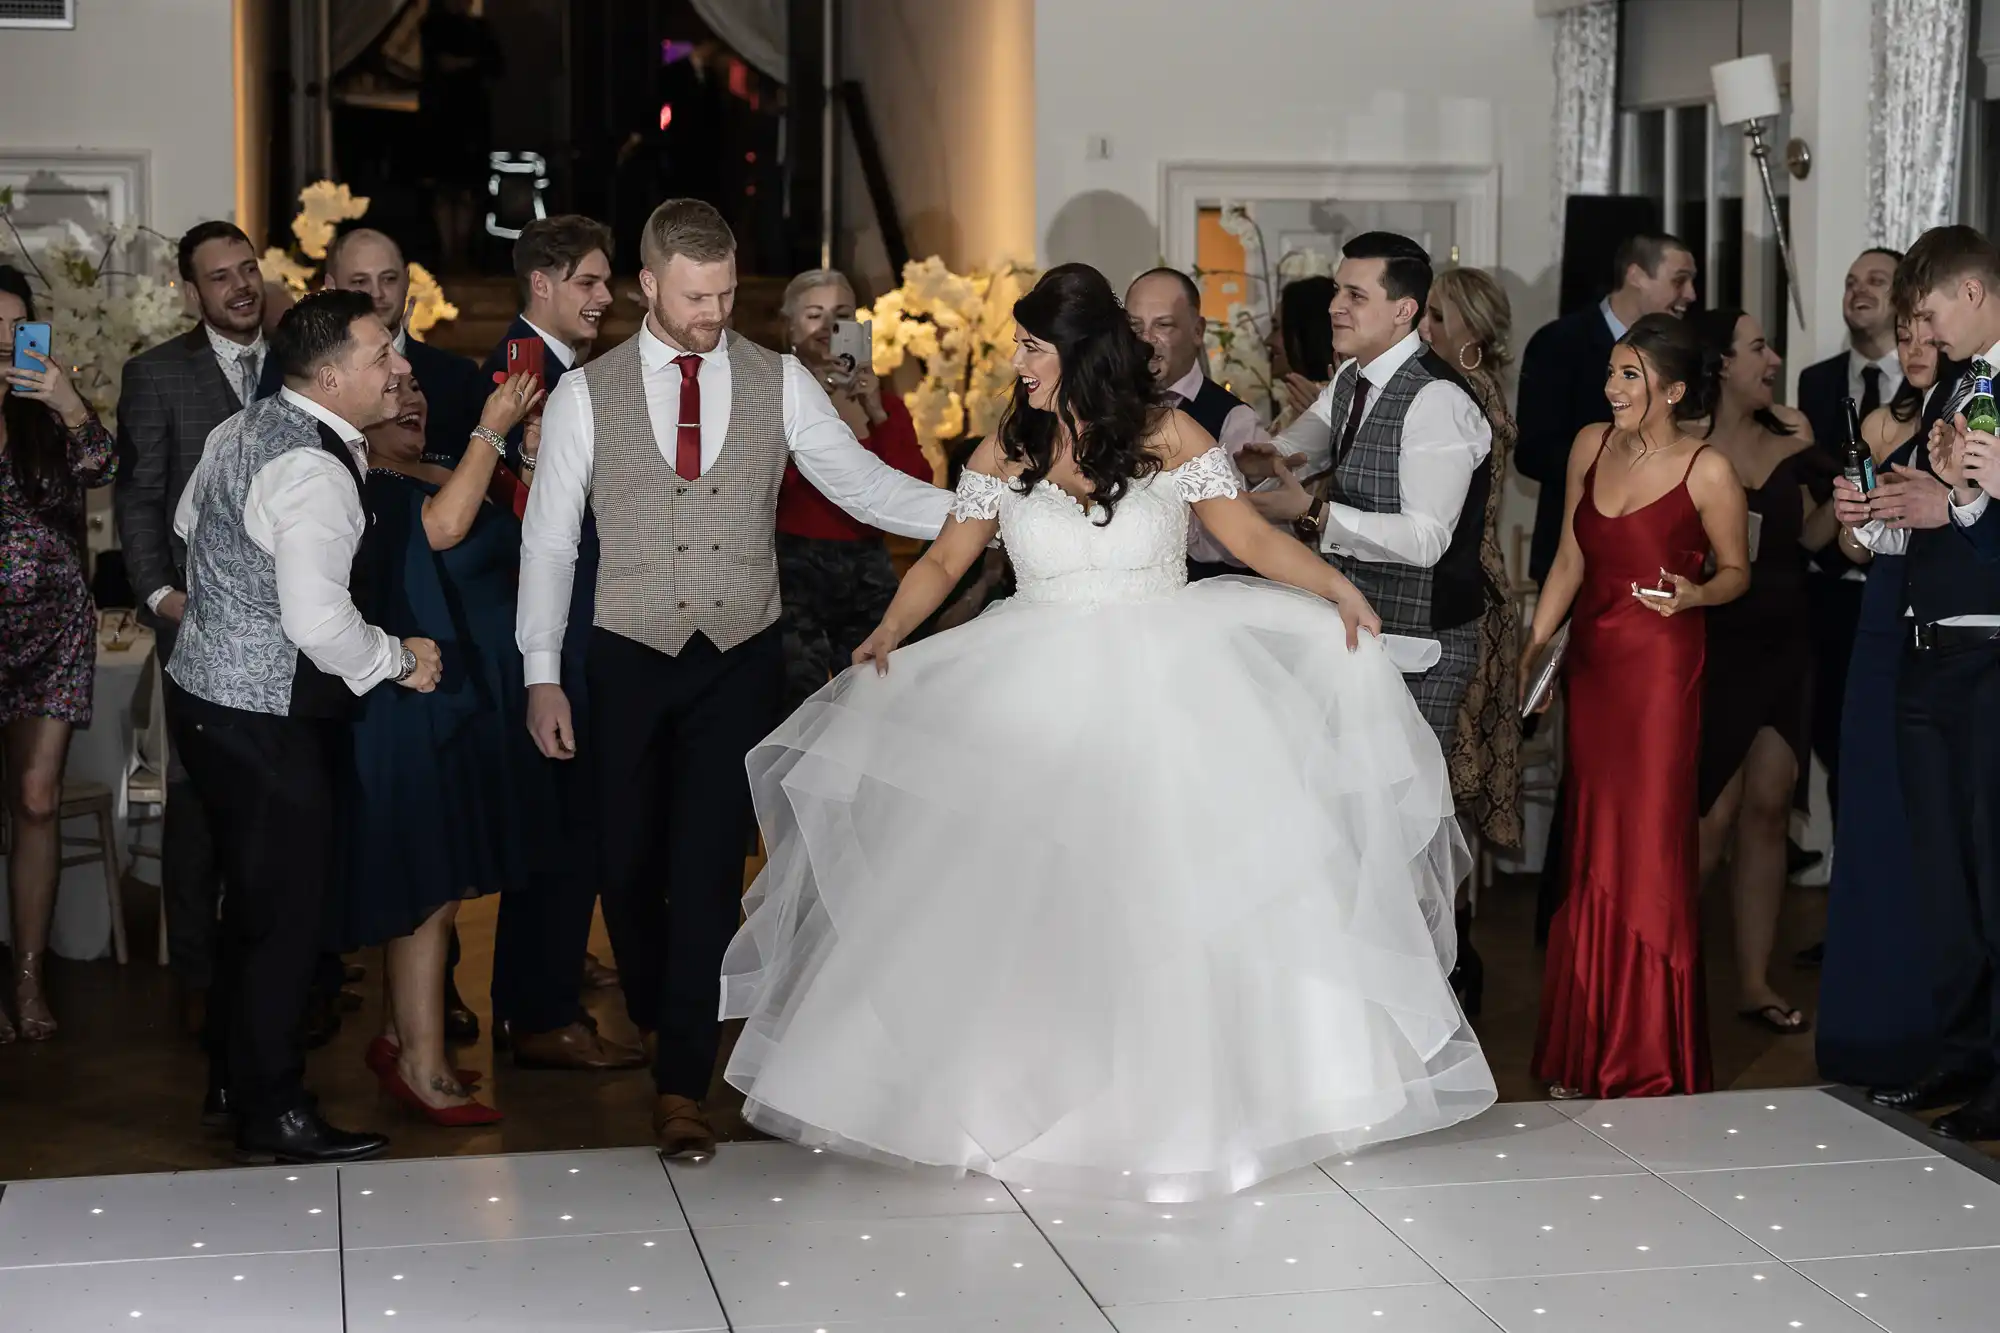 A couple dances at their wedding reception, surrounded by guests in formal attire who are clapping and watching them on a white-lit dance floor.